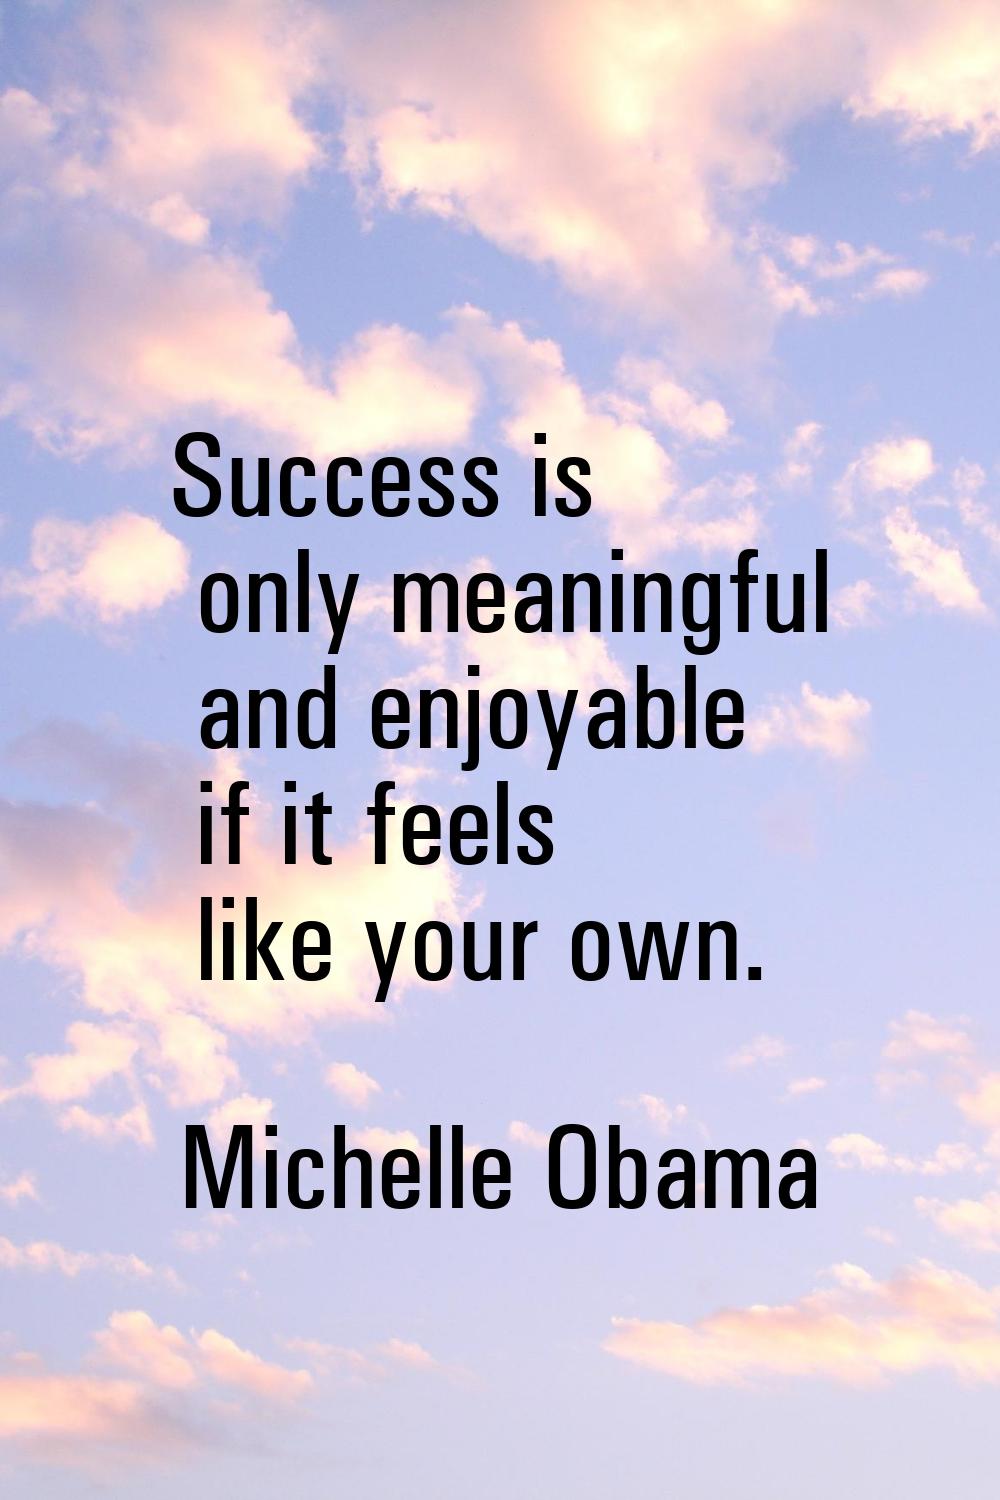 Success is only meaningful and enjoyable if it feels like your own.